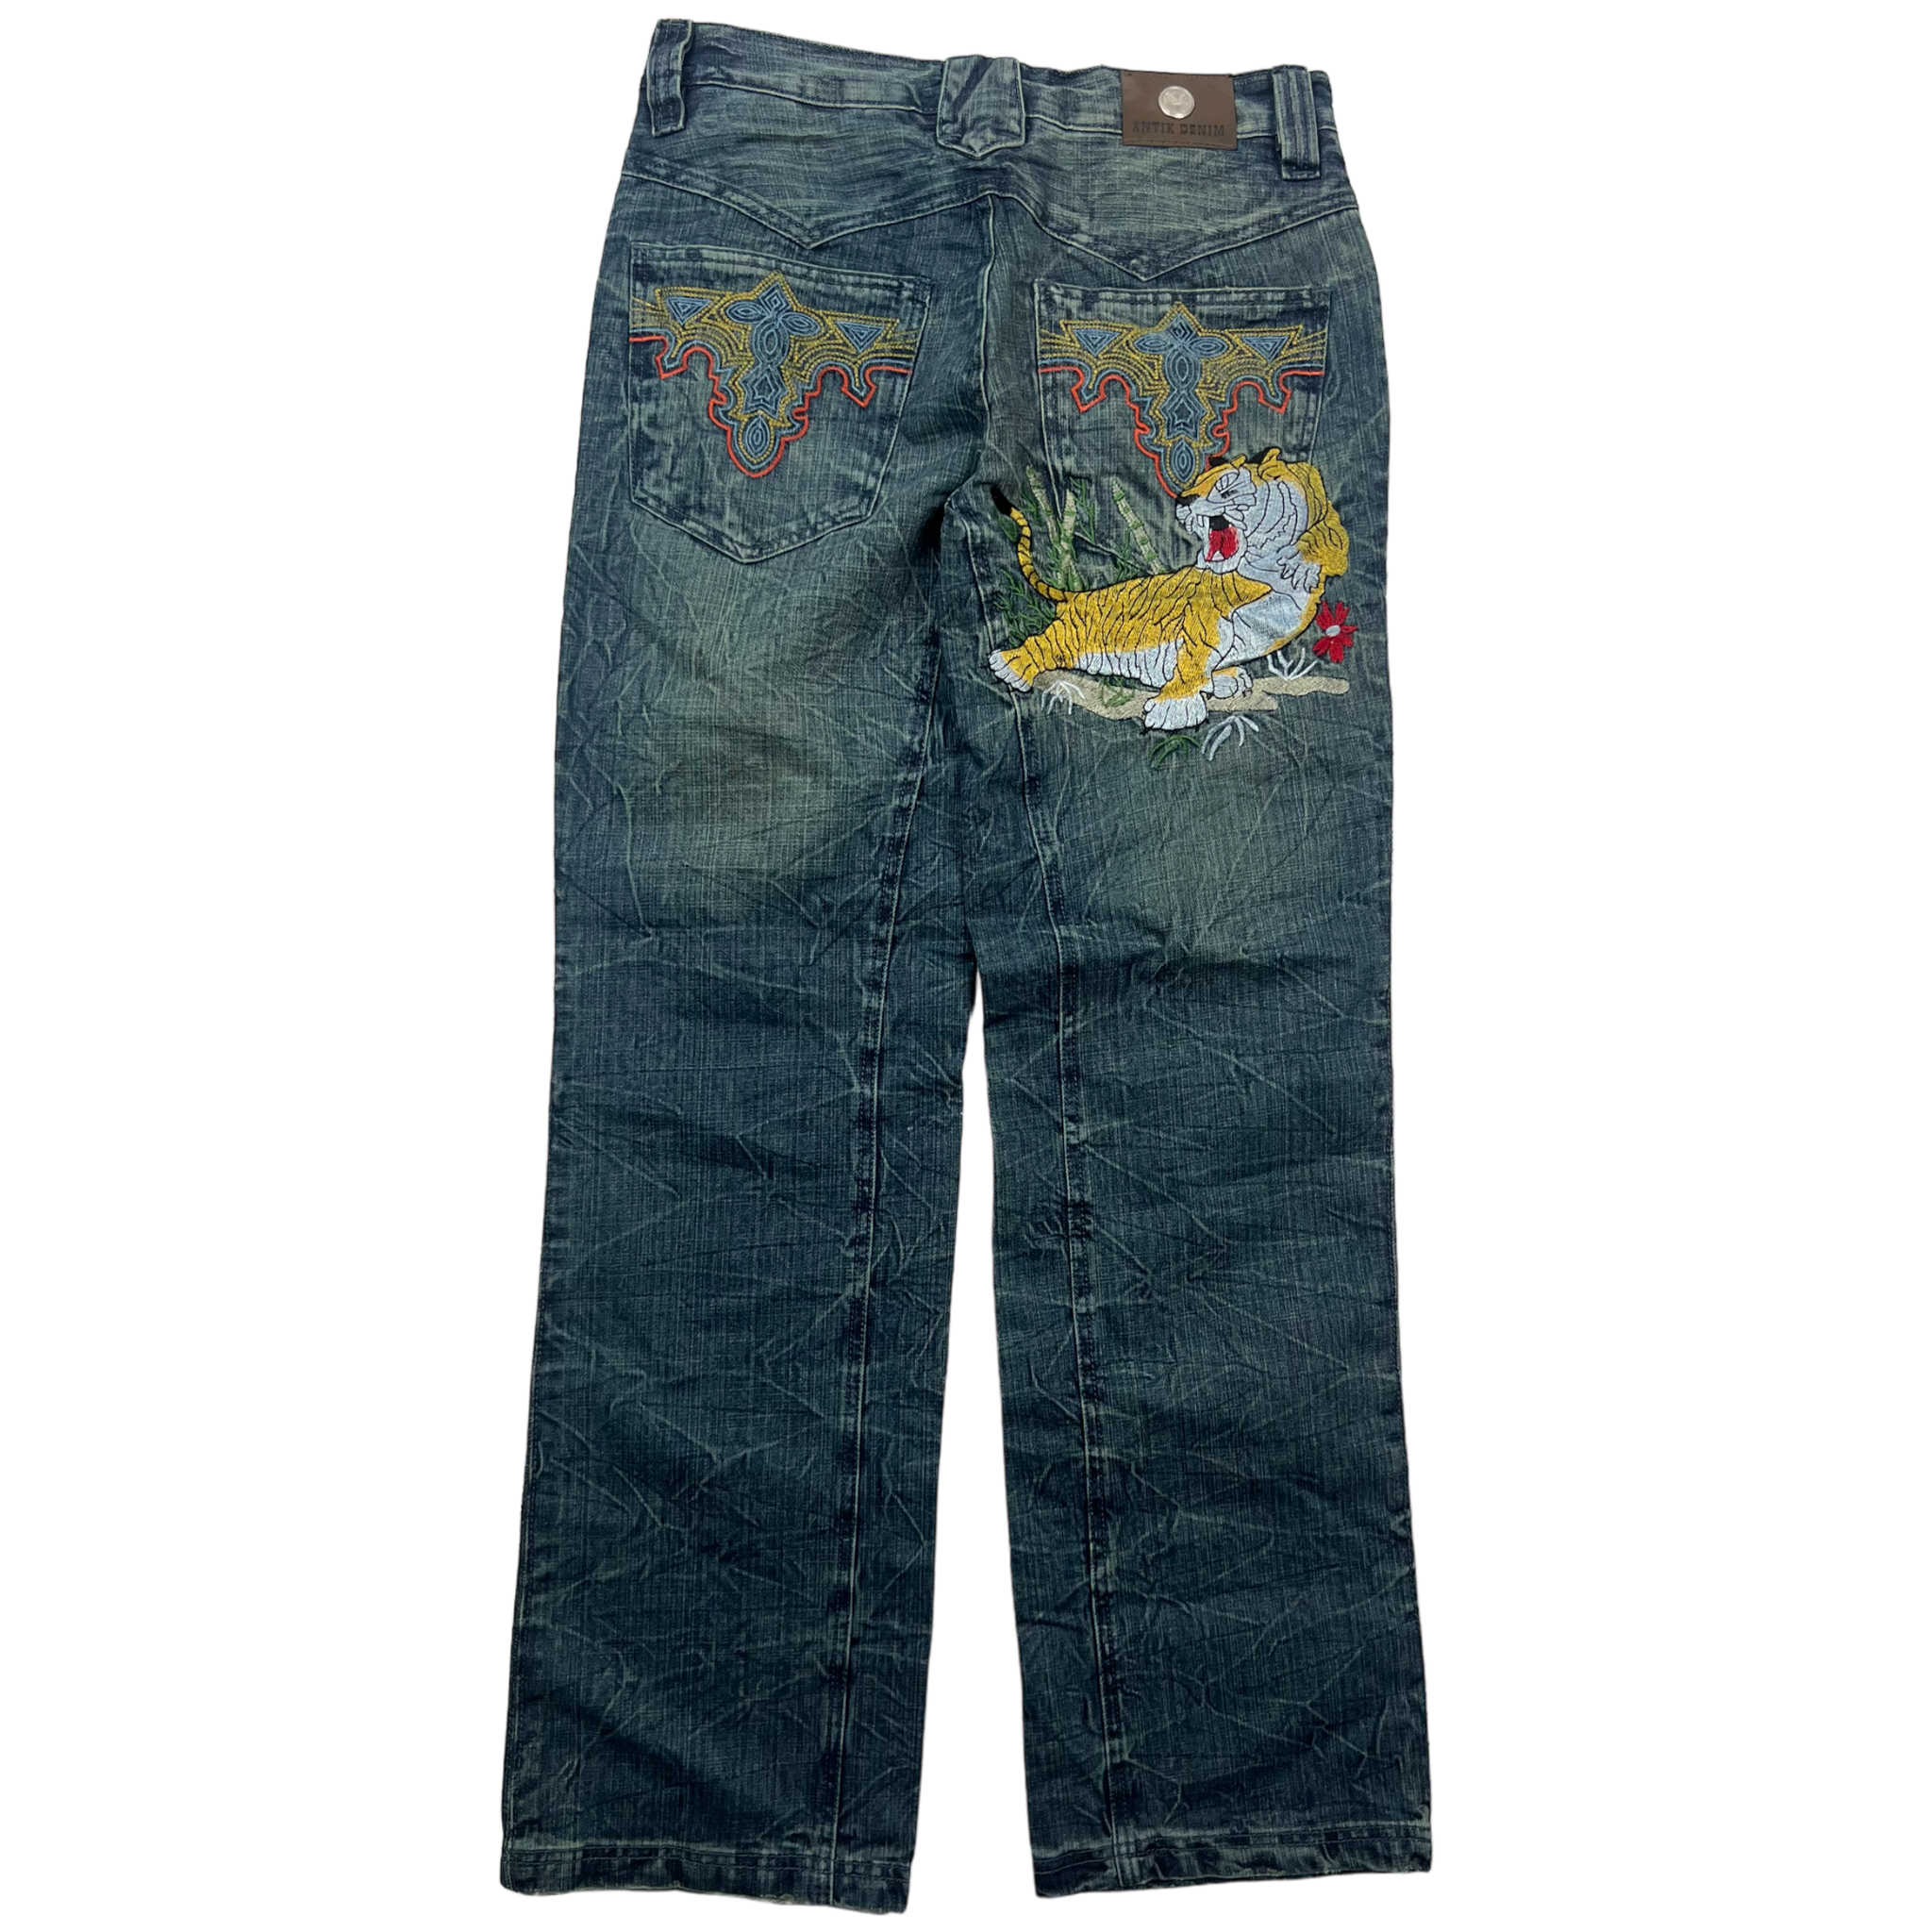 Ed Hardy Style Jeans (32)